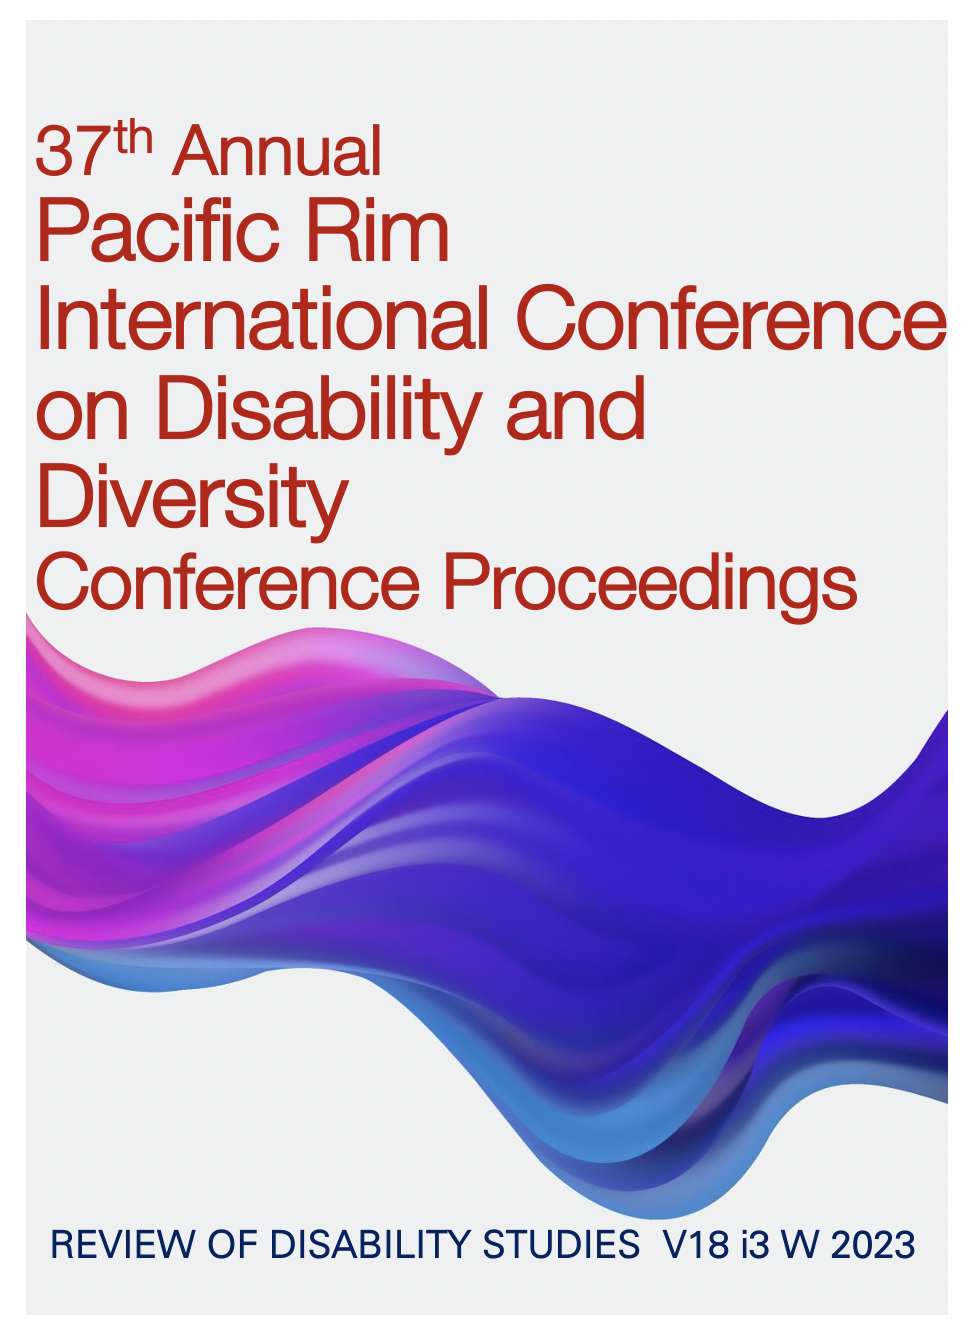 cover of Conference Proceeding Issue with decorative wave-like image